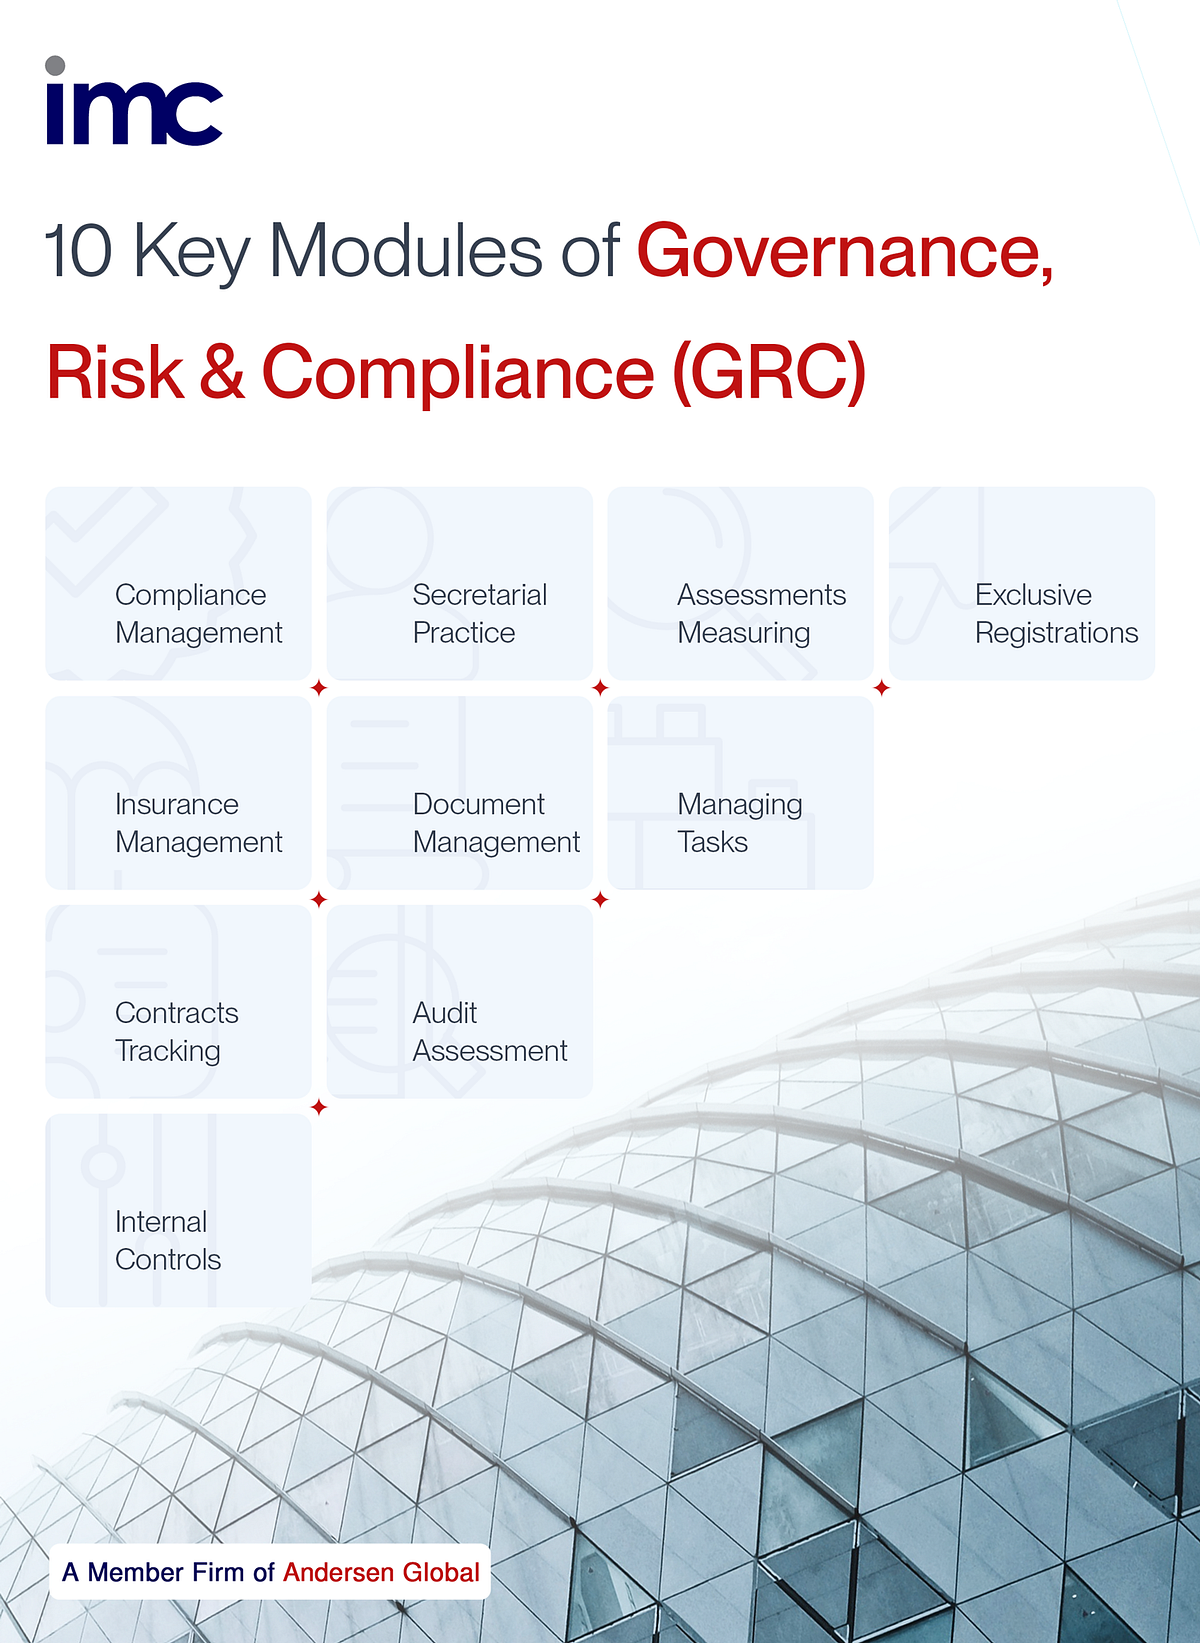 Modules of Governance Risk and Compliance - IMCGroup - Medium